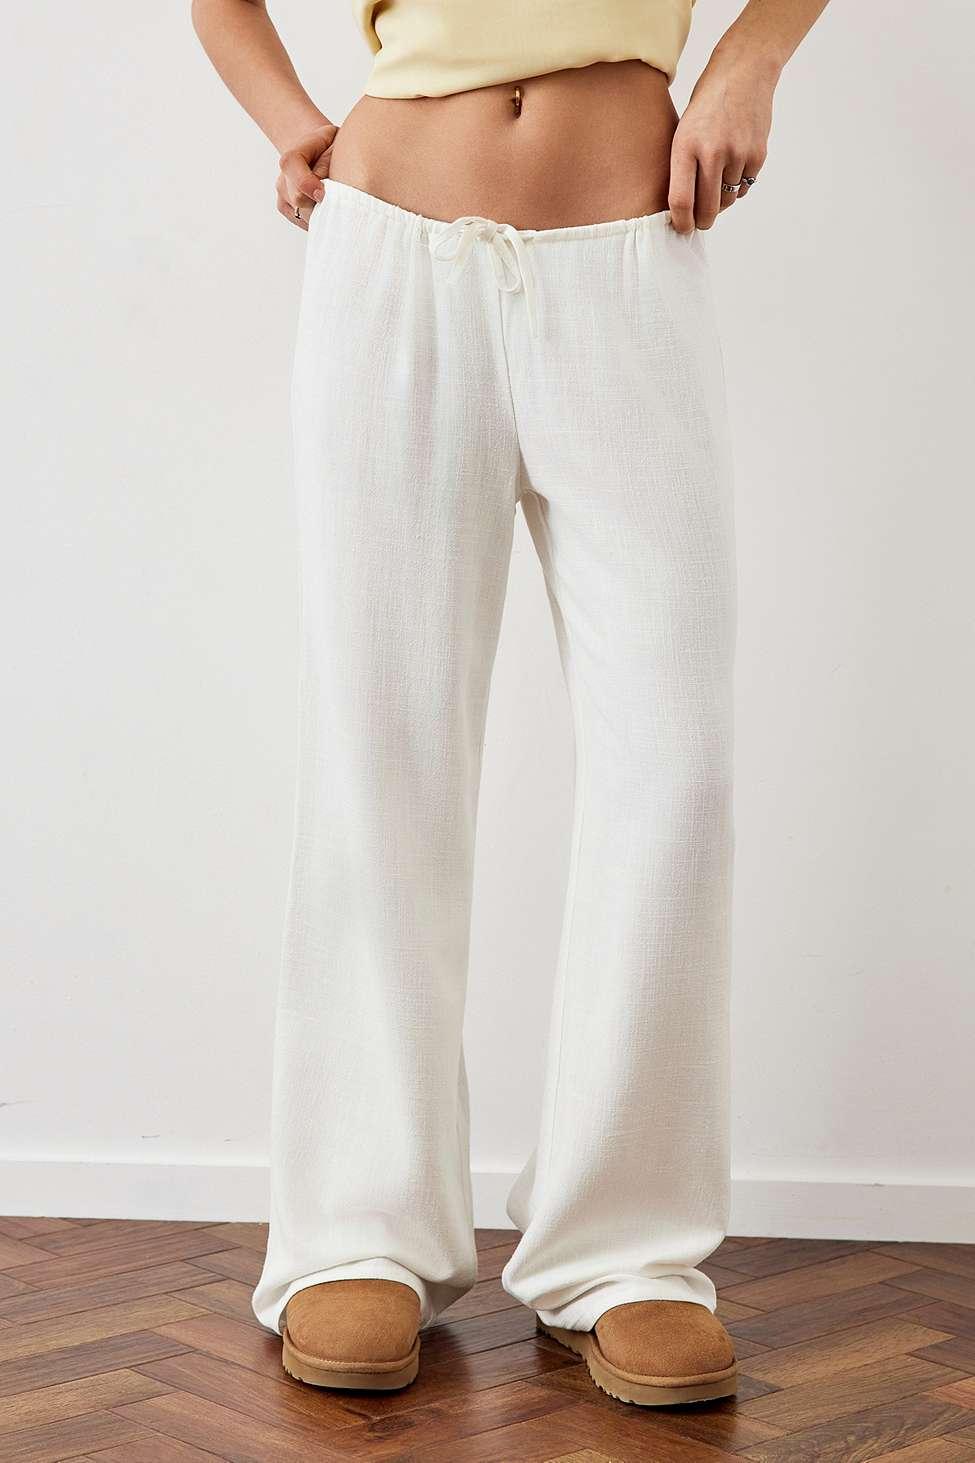 30 types of linen pant designs that look absolutely beautiful